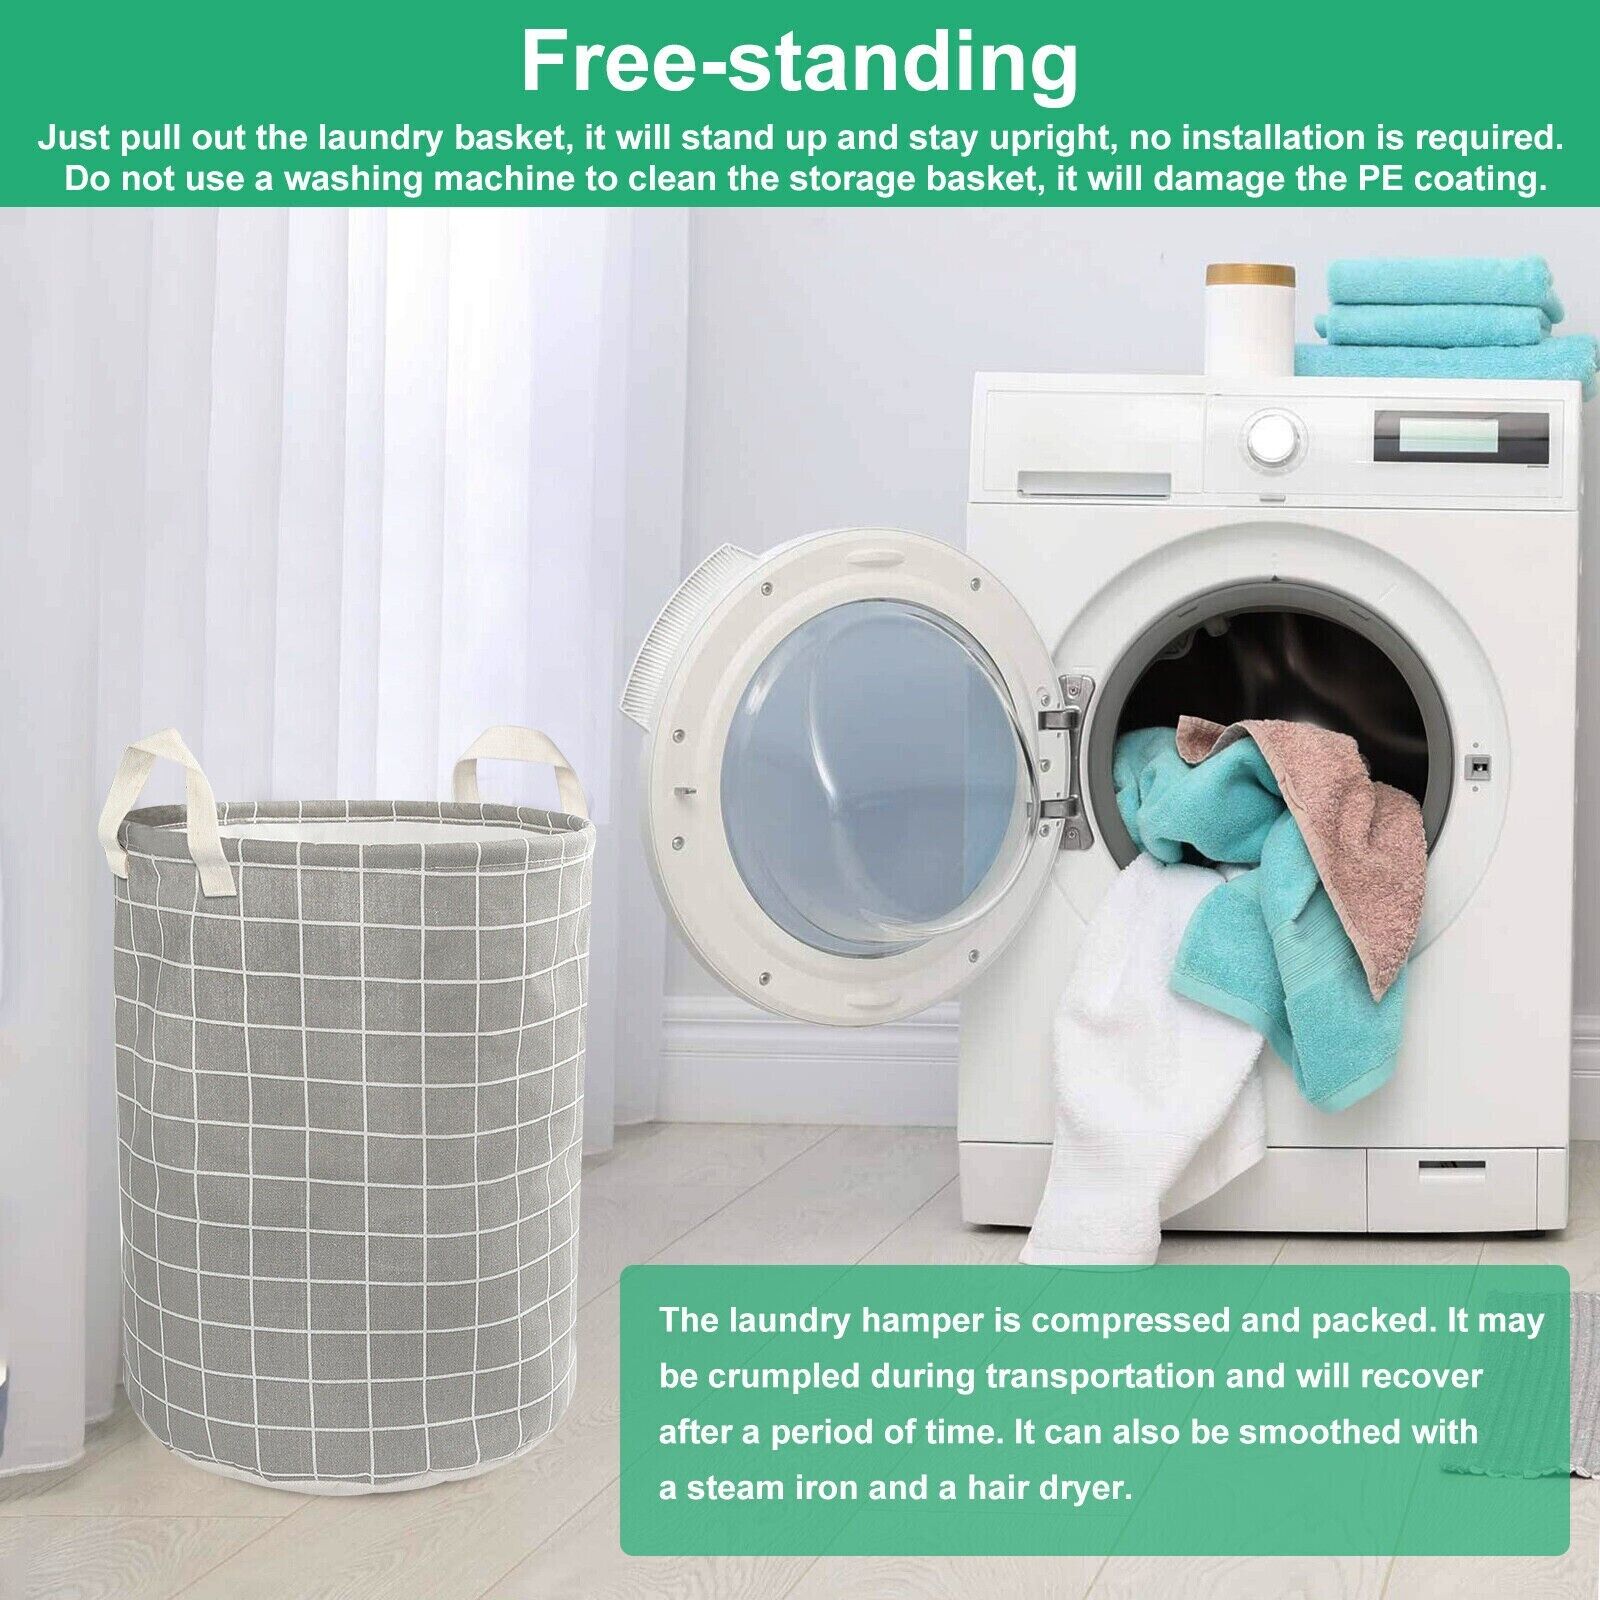 Collapsible laundry basket free standing